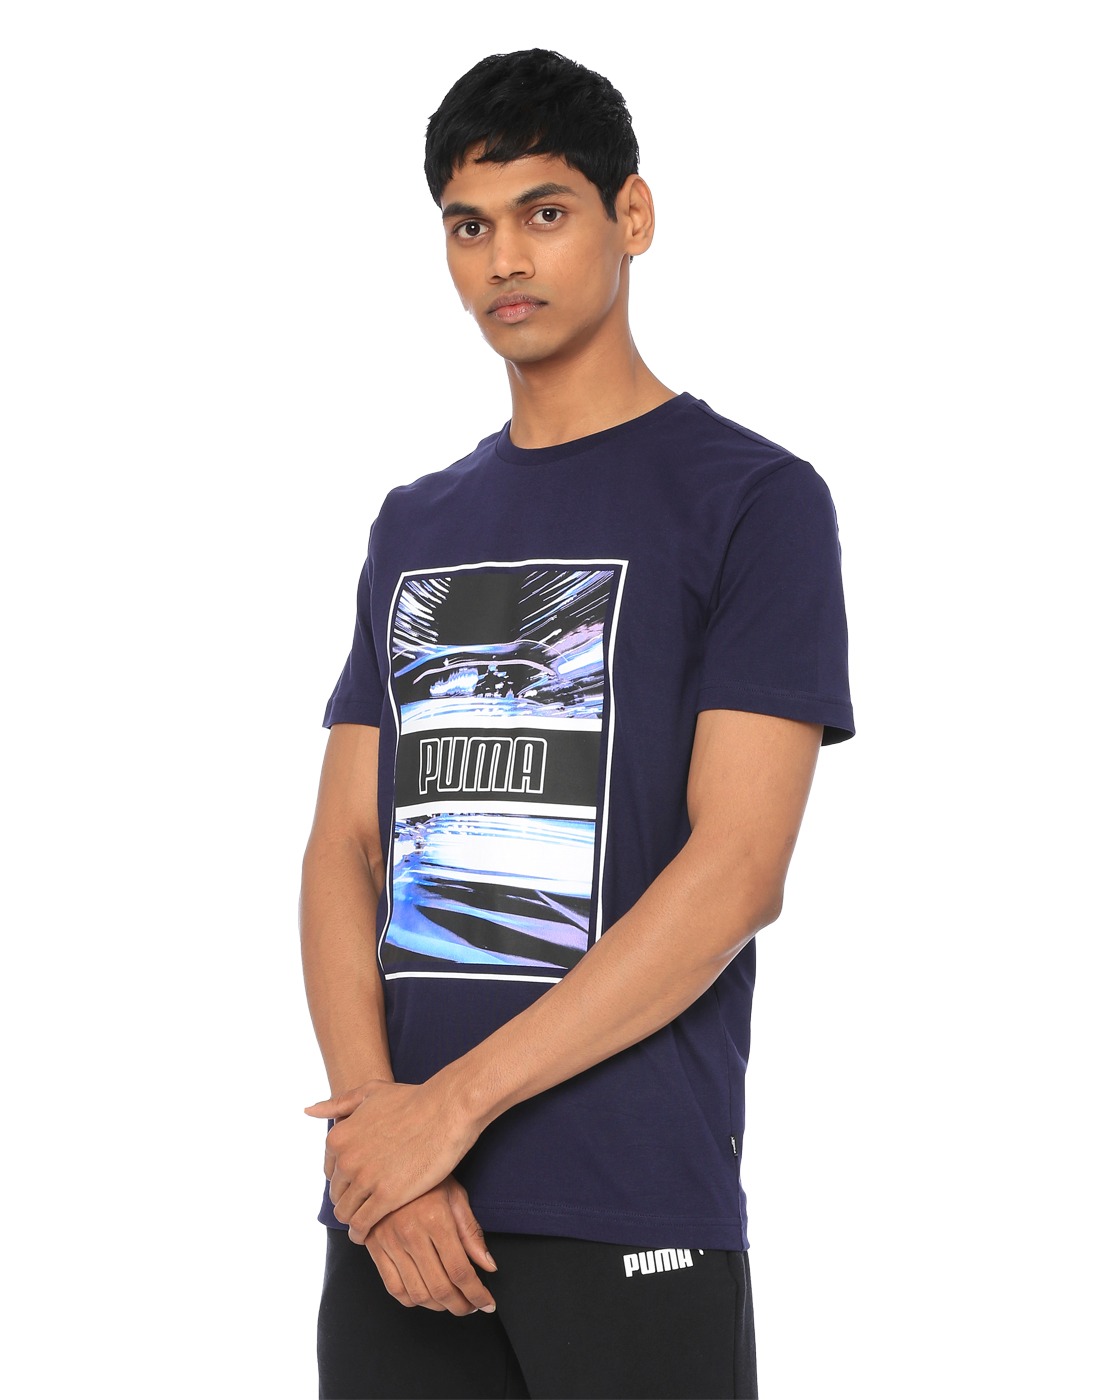 Buy PUMA T-Shirts & Tops at Best Prices Online in Bangladesh